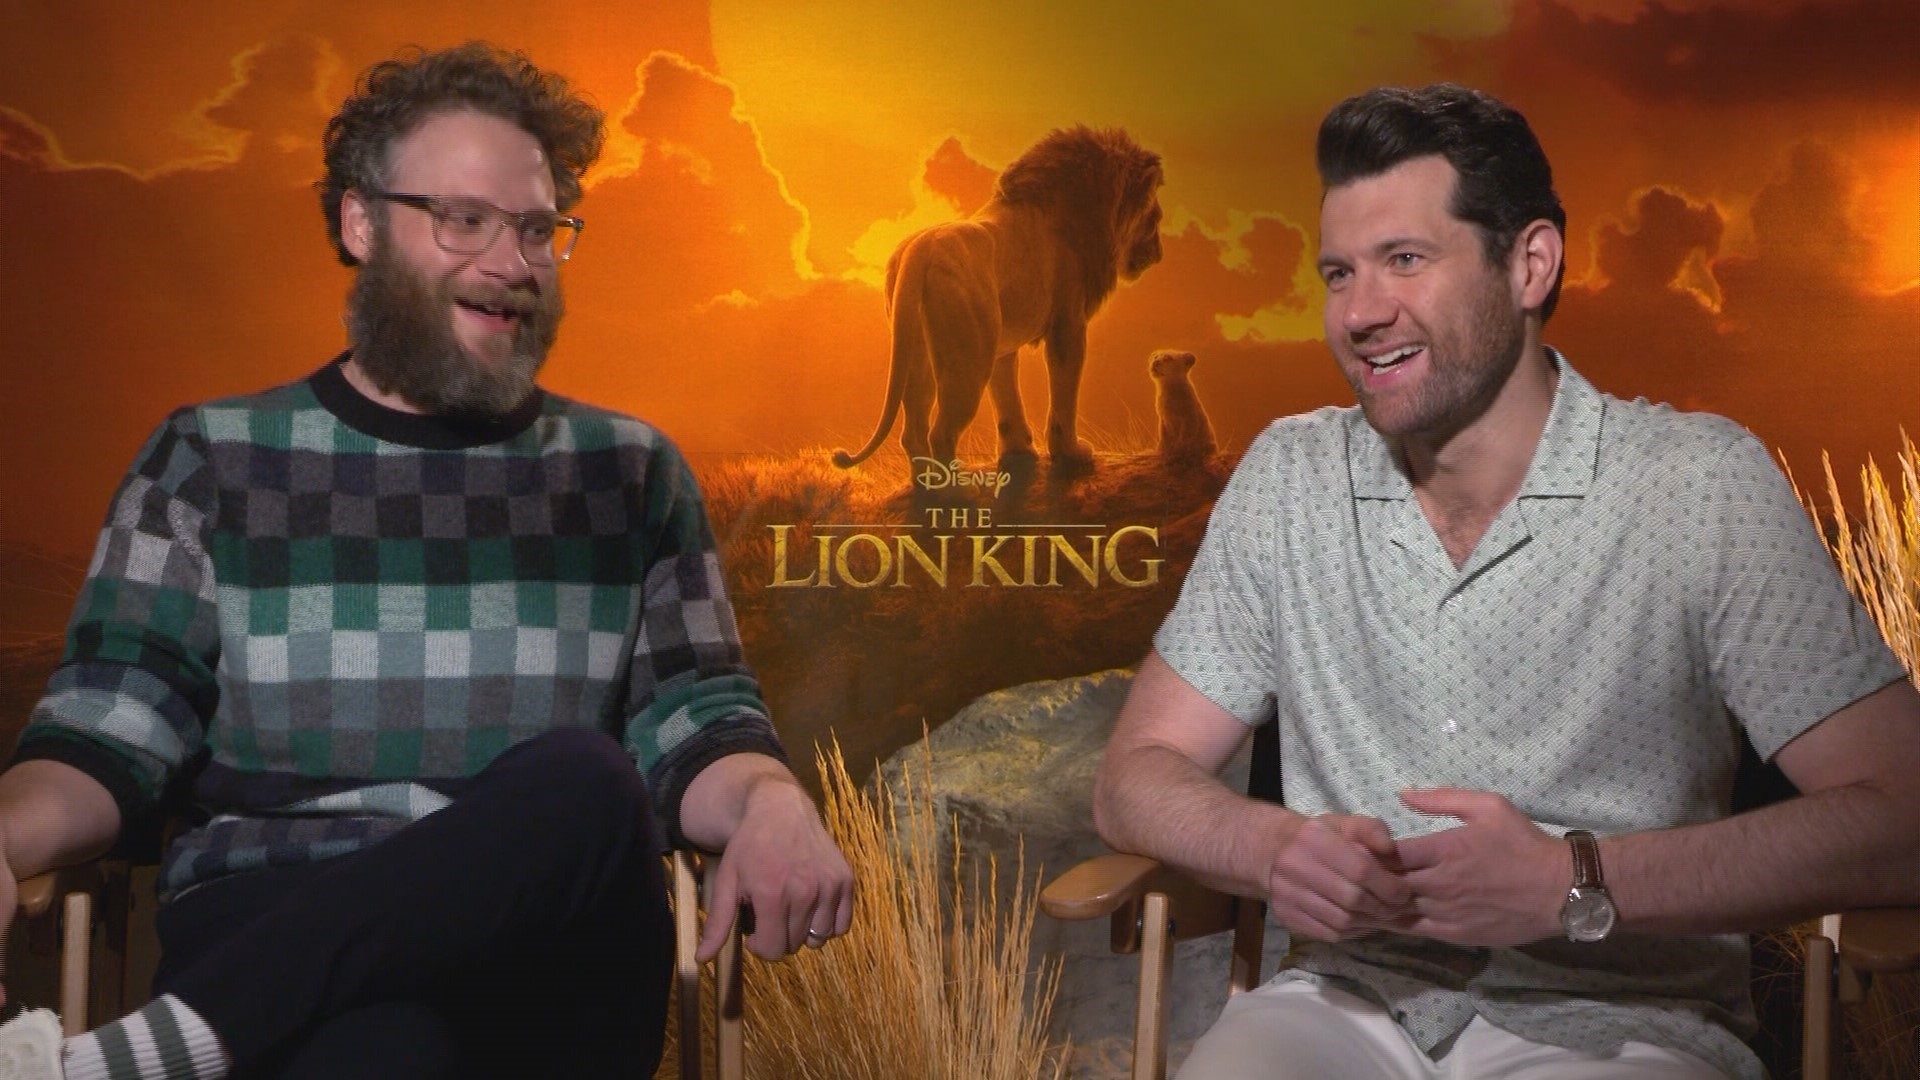 Audiences will fall in love with Timon and Pumbaa all over again thanks to Eichner and Rogen's on-screen chemistry. Travel and accommodations provided by Disney.